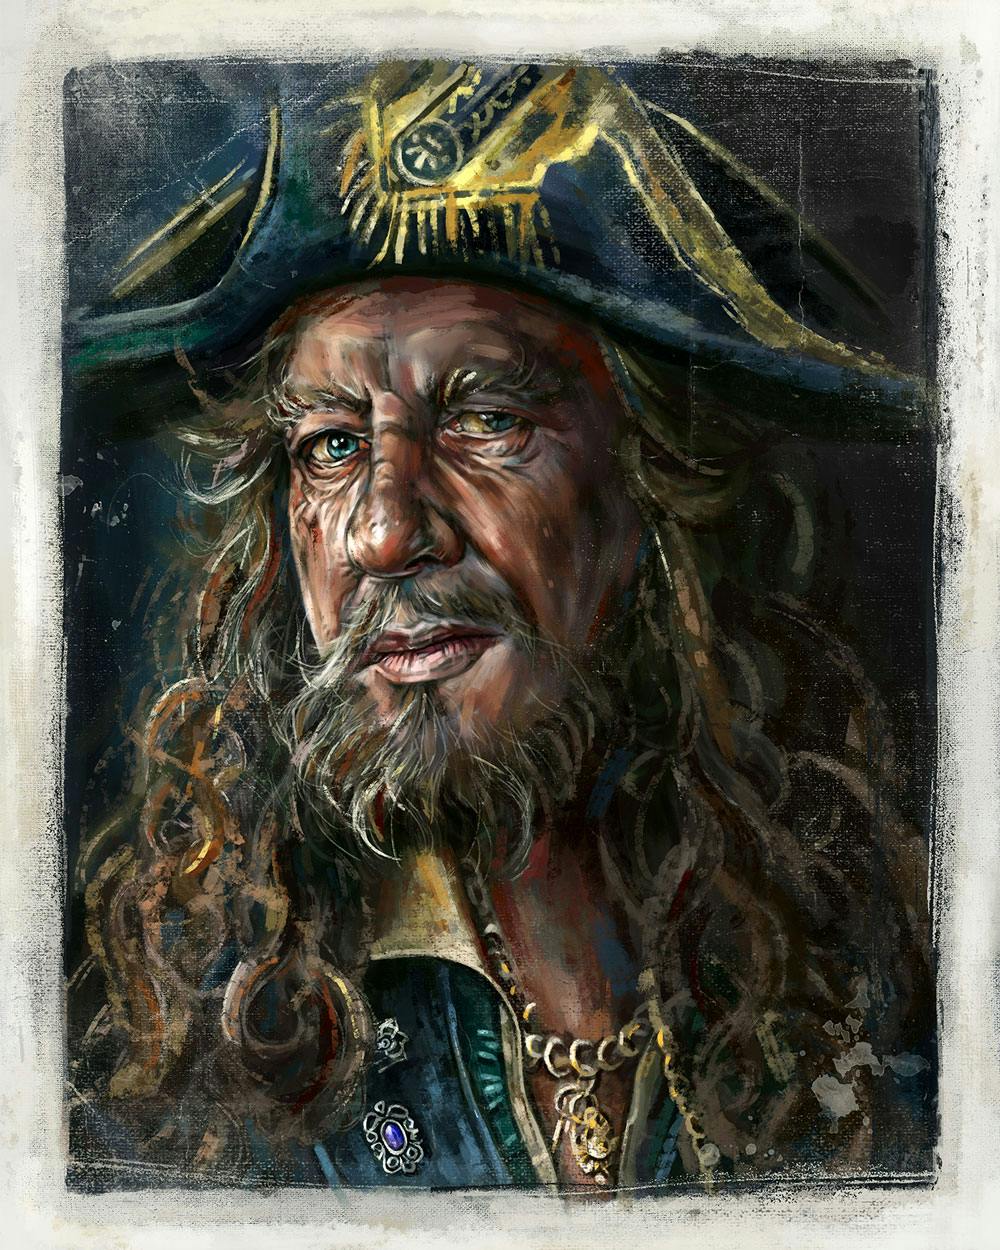 Original artwork of Hector Barbossa from "Pirates of the Caribbean" created by Celebrity Fan Fest guest artisit Robert Bruno